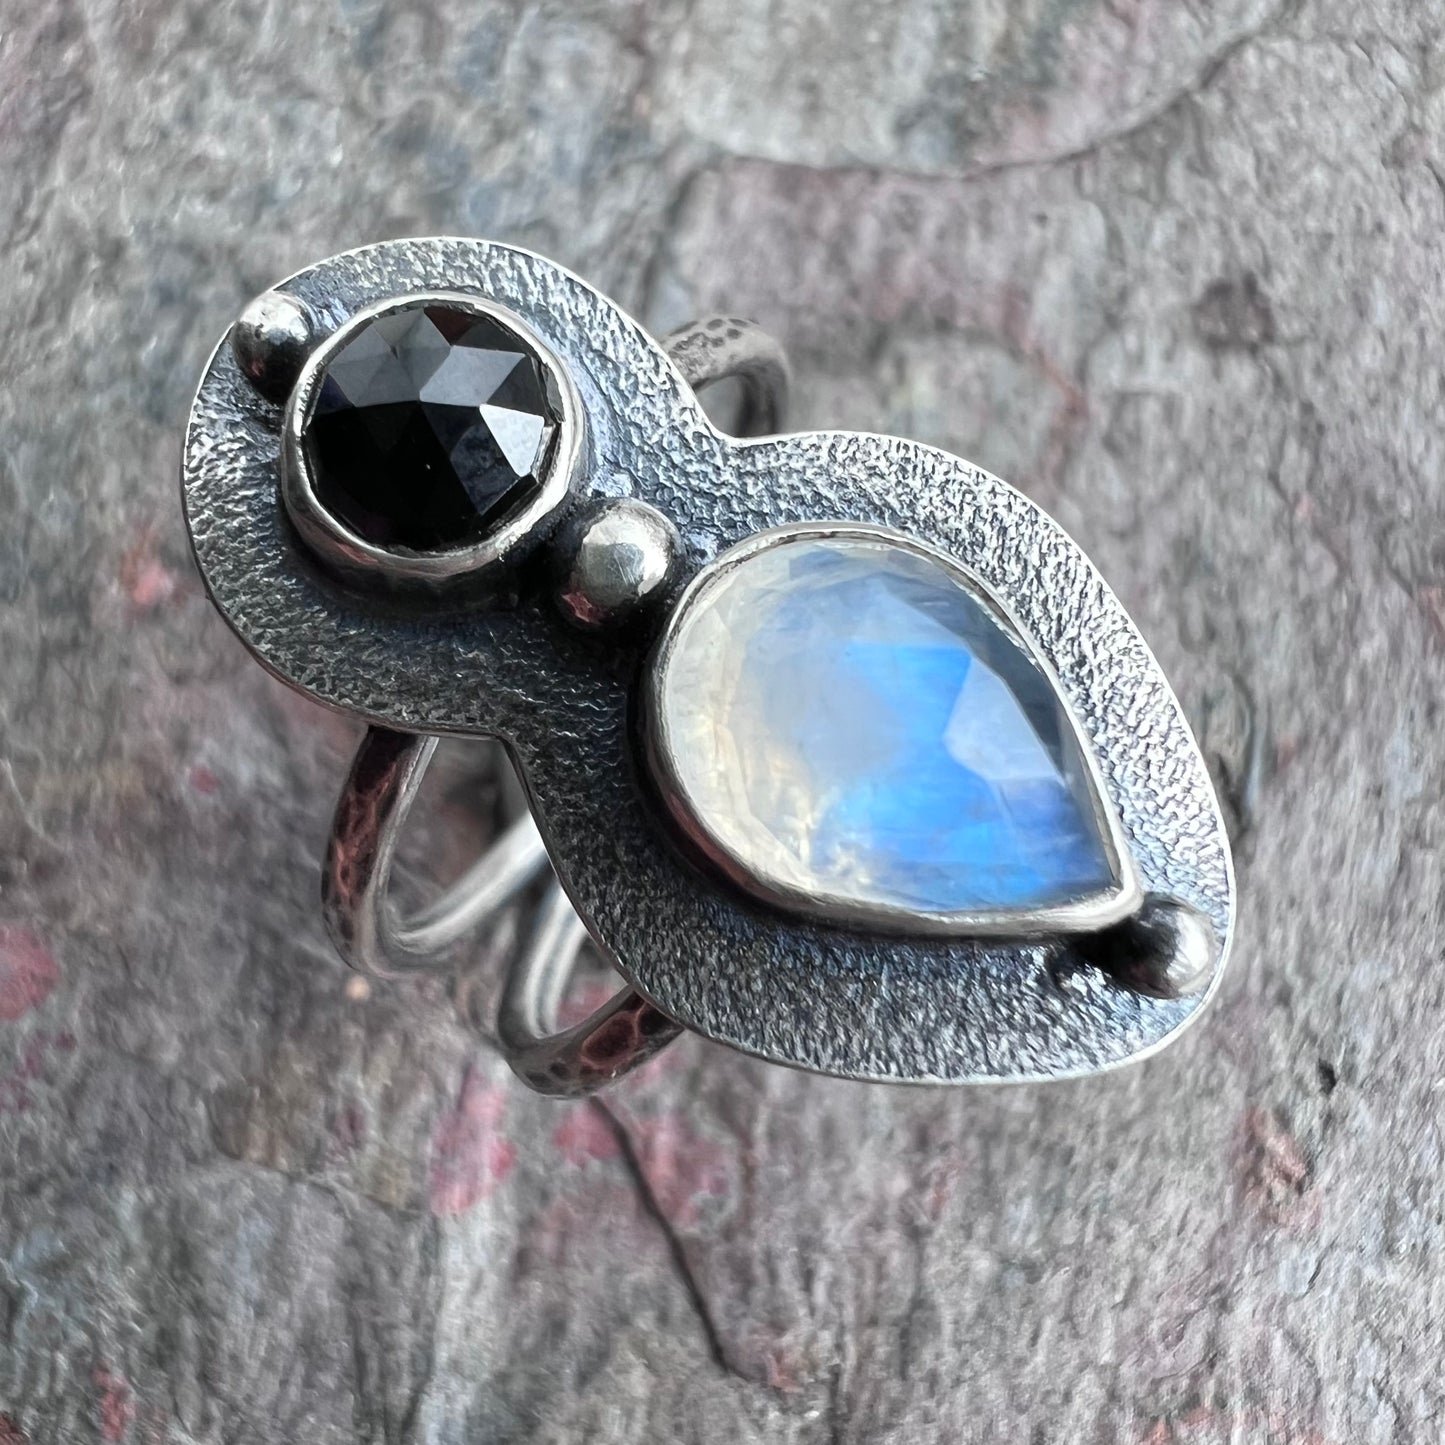 Rainbow Moonstone and Black Spinel Sterling Silver Ring - Handmade One-of-a-kind Ring - Size 8